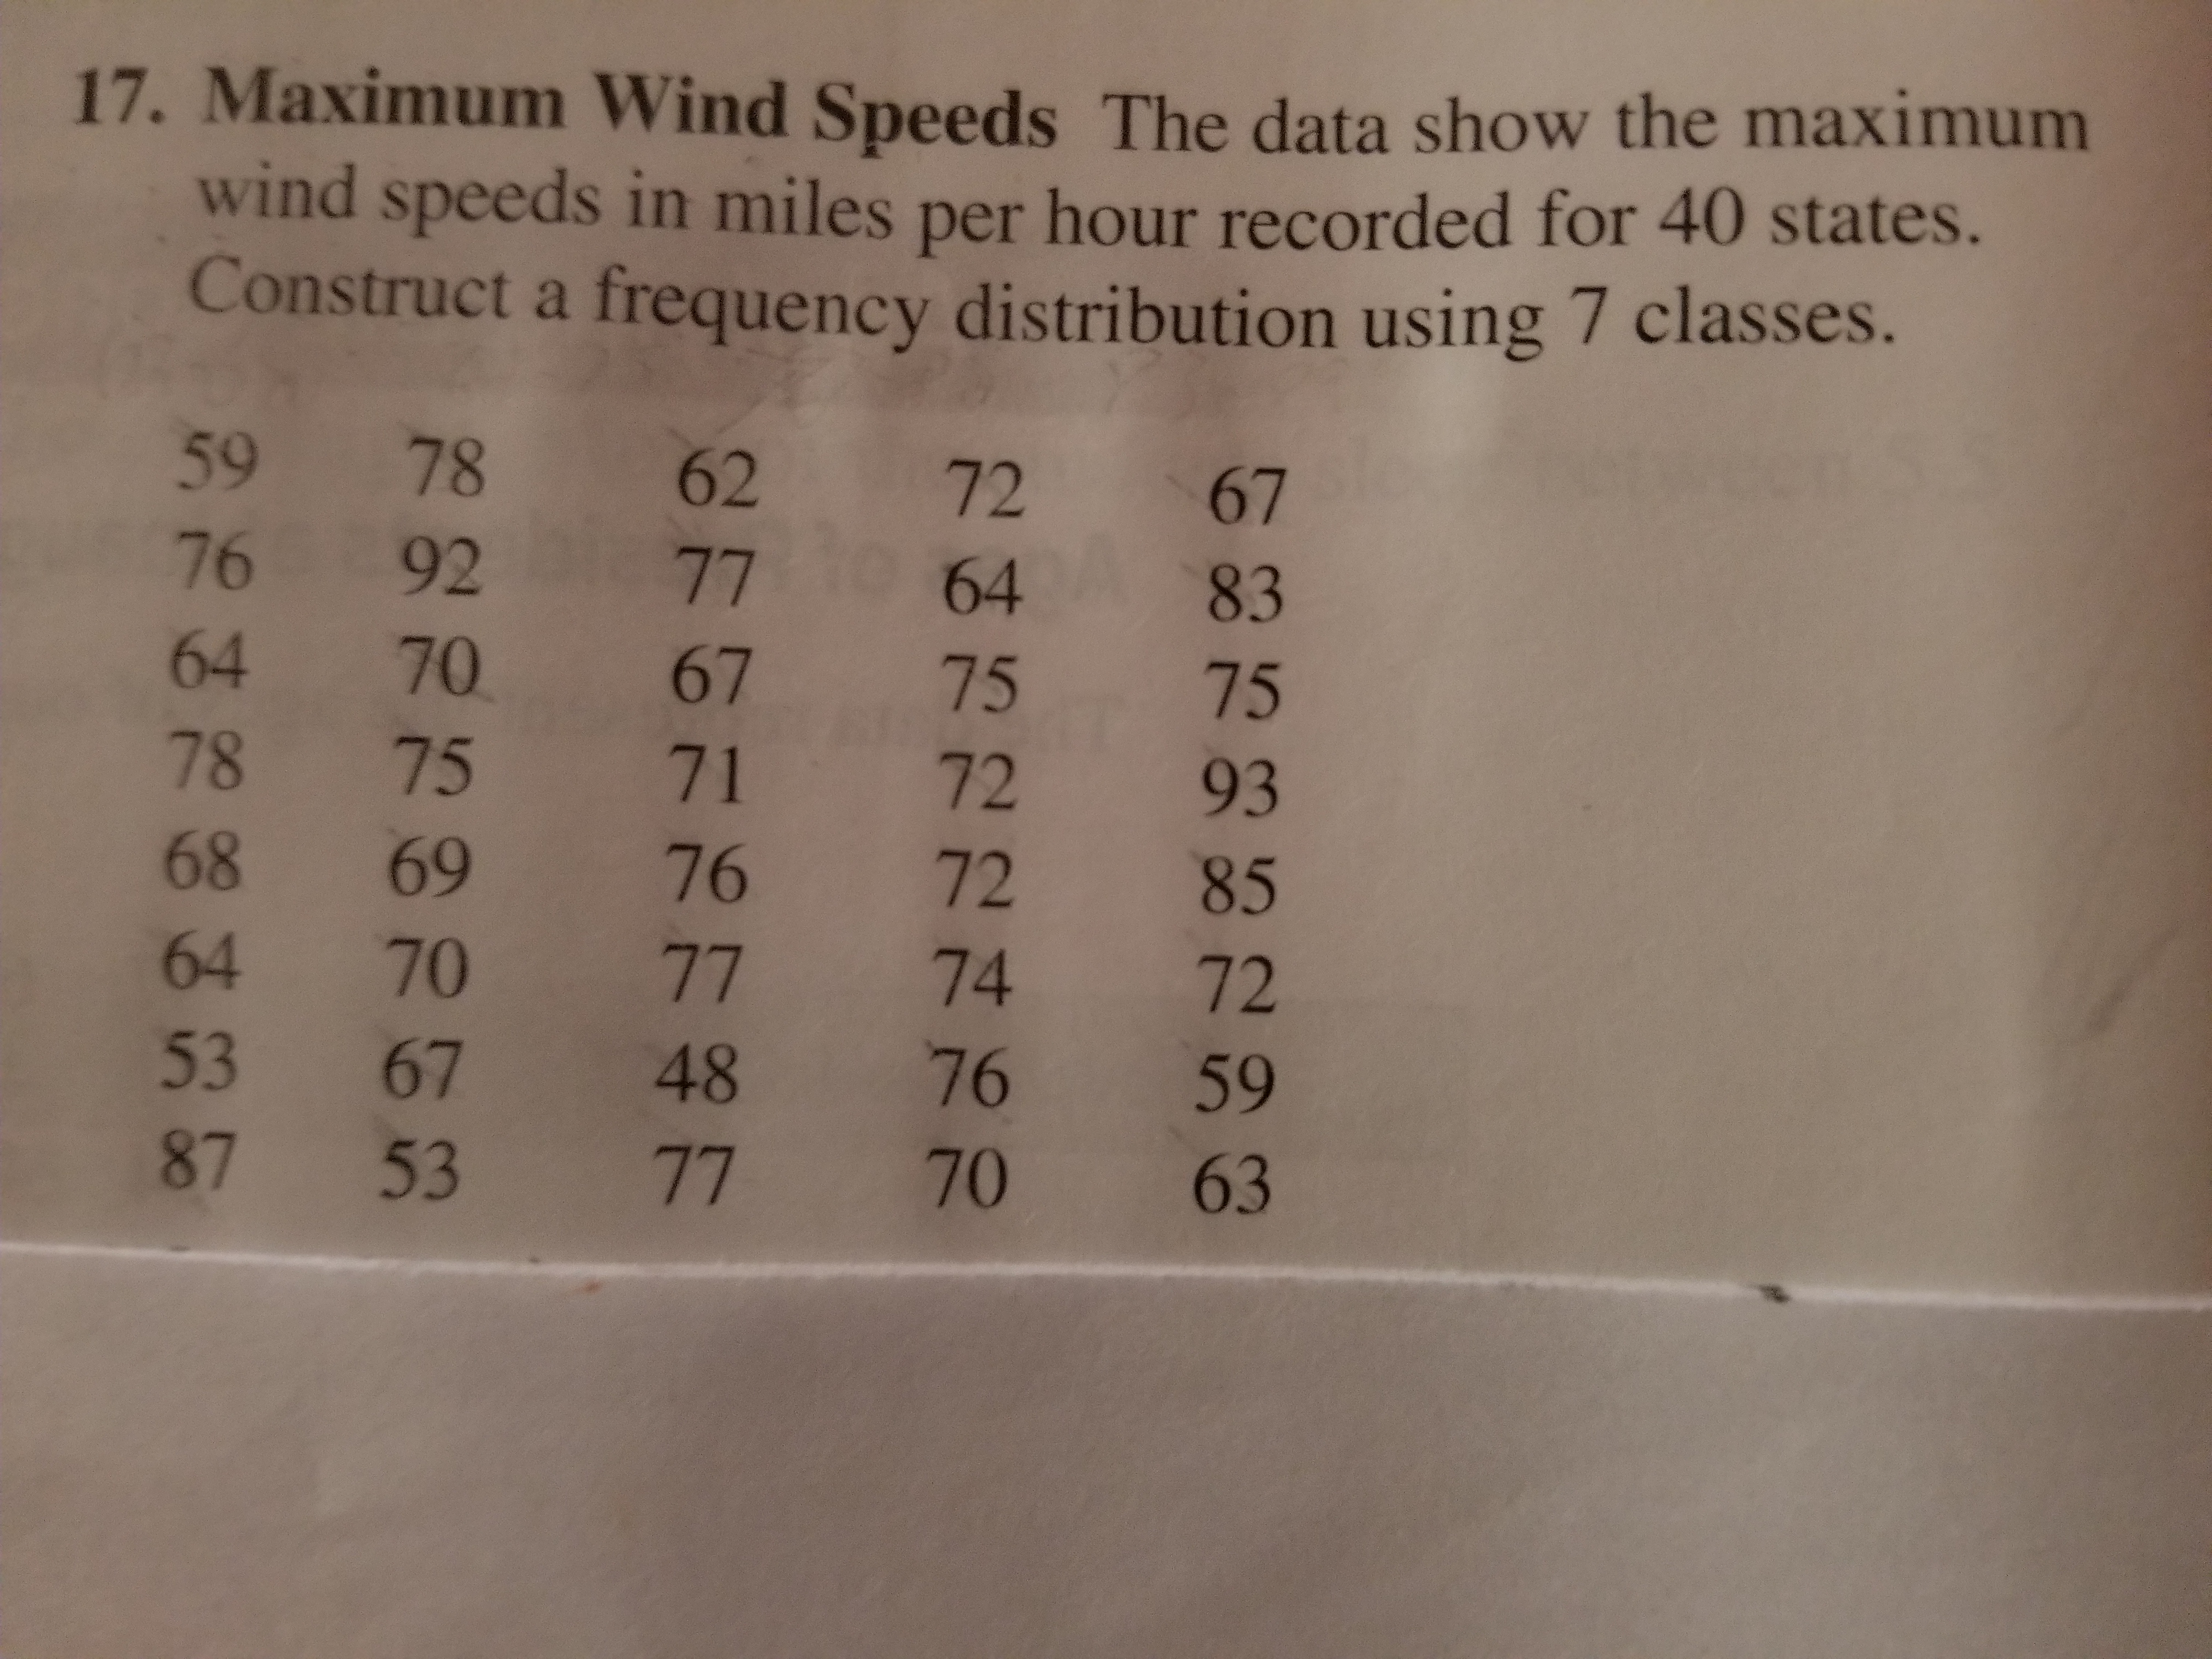 17. Maximum Wind Speeds The data show the maximum
wind speeds in miles per hour recorded for 40 st
Construct a frequency distribution using 7 classes.
ates.
59 78 62 72 67
76 92 7764 83
64 70 67 75 75
78 75 71 72 93
68 69 76 72 85
64 70 77 74 72
53 67 48 76 59
87 53 77 70 63
